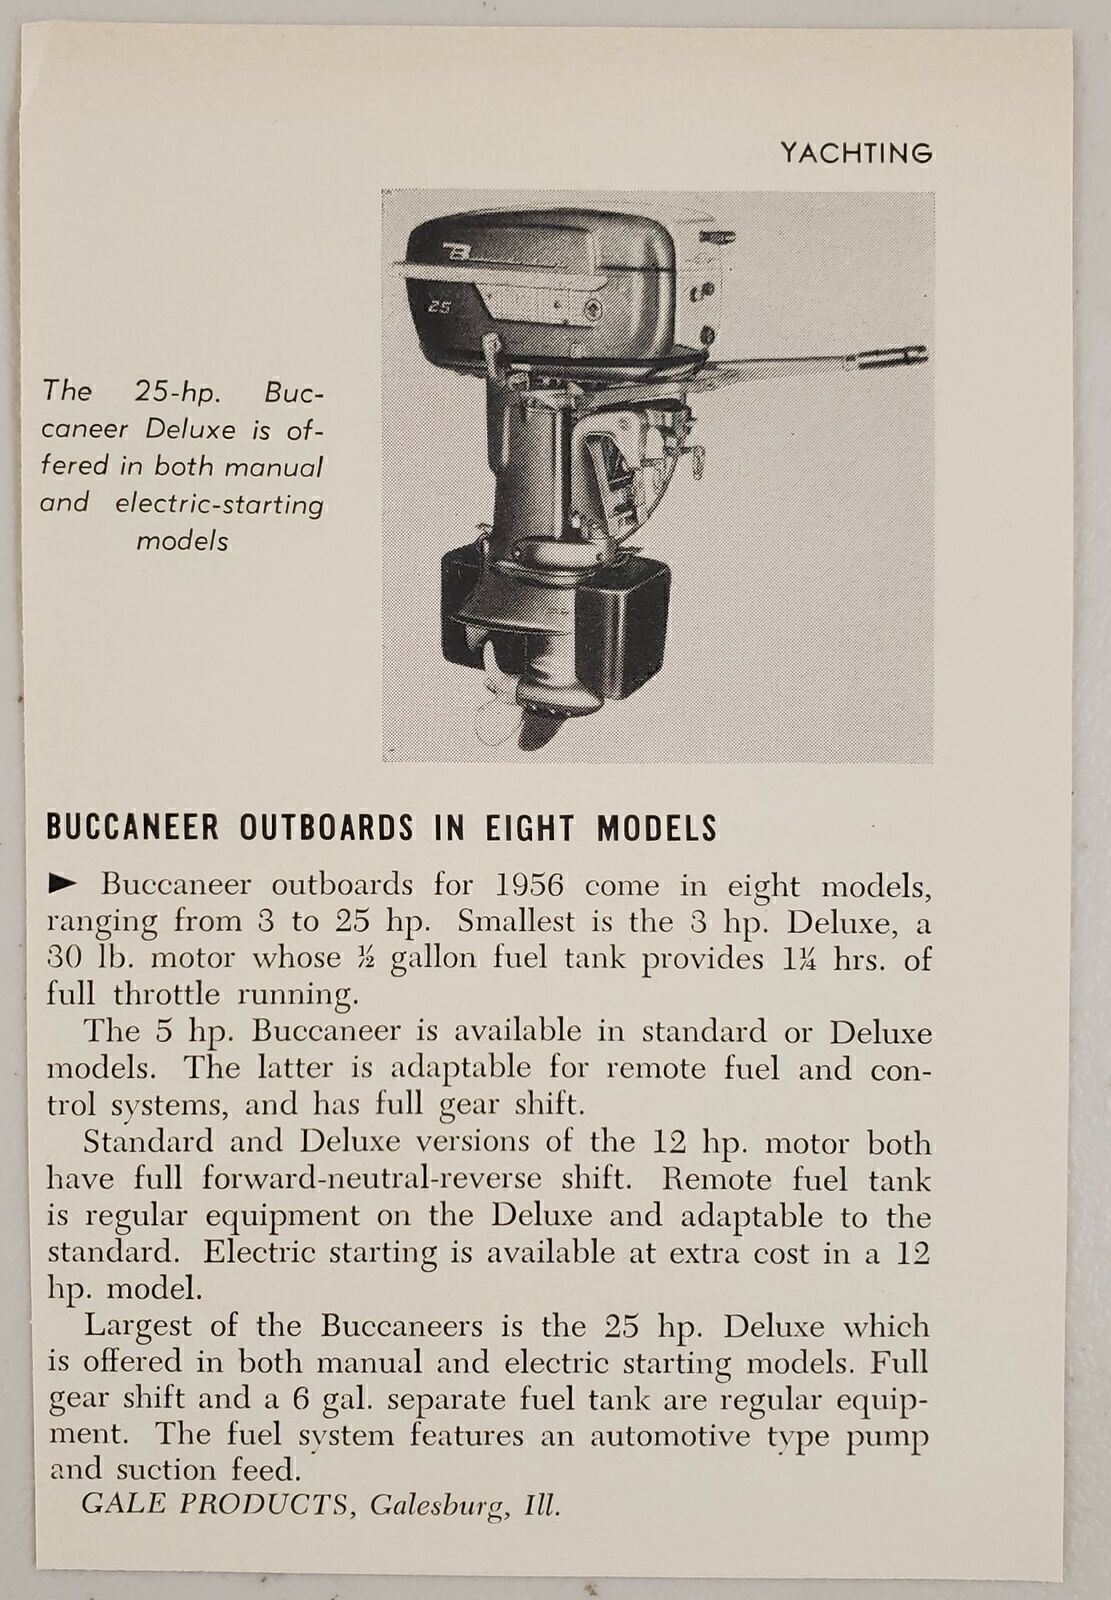 1956 Magazine Photo Buccaneer 25-HP Deluxe Outboard Motors Gale Galesburg,IL